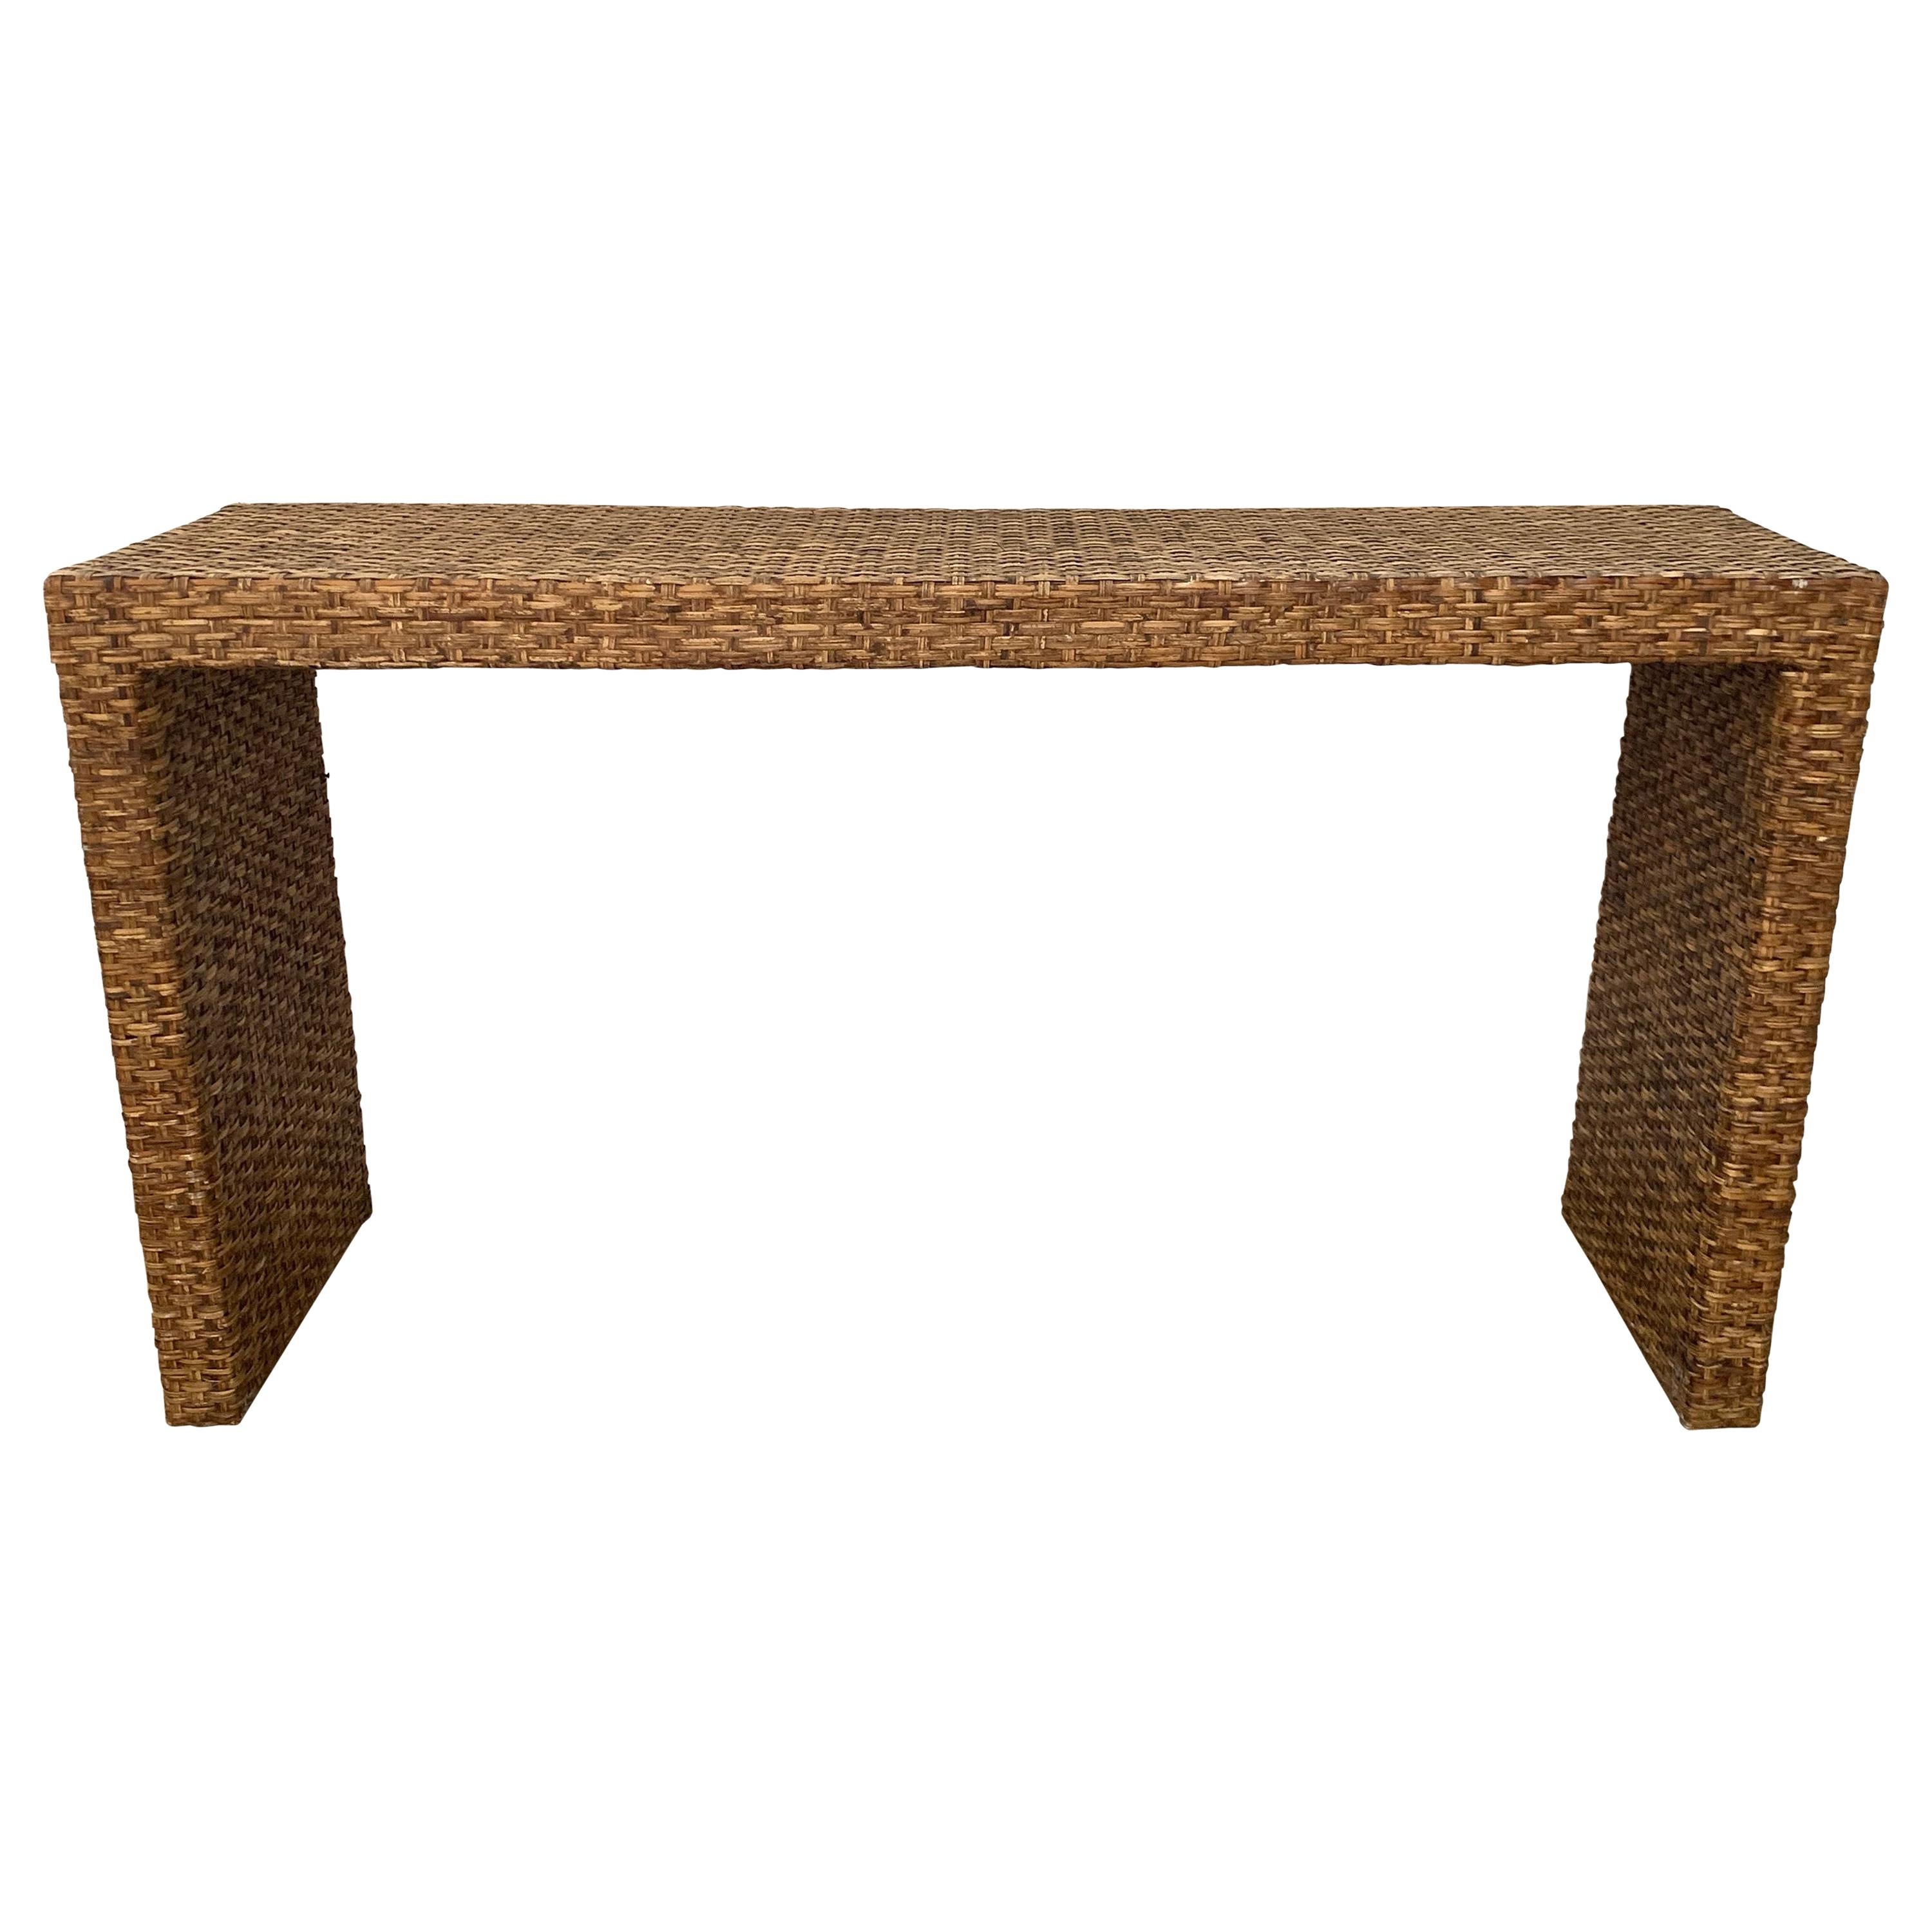 Italian Mid-Century Modern Woven Wicker Parsons Waterfall Console, Italy, 1970s For Sale